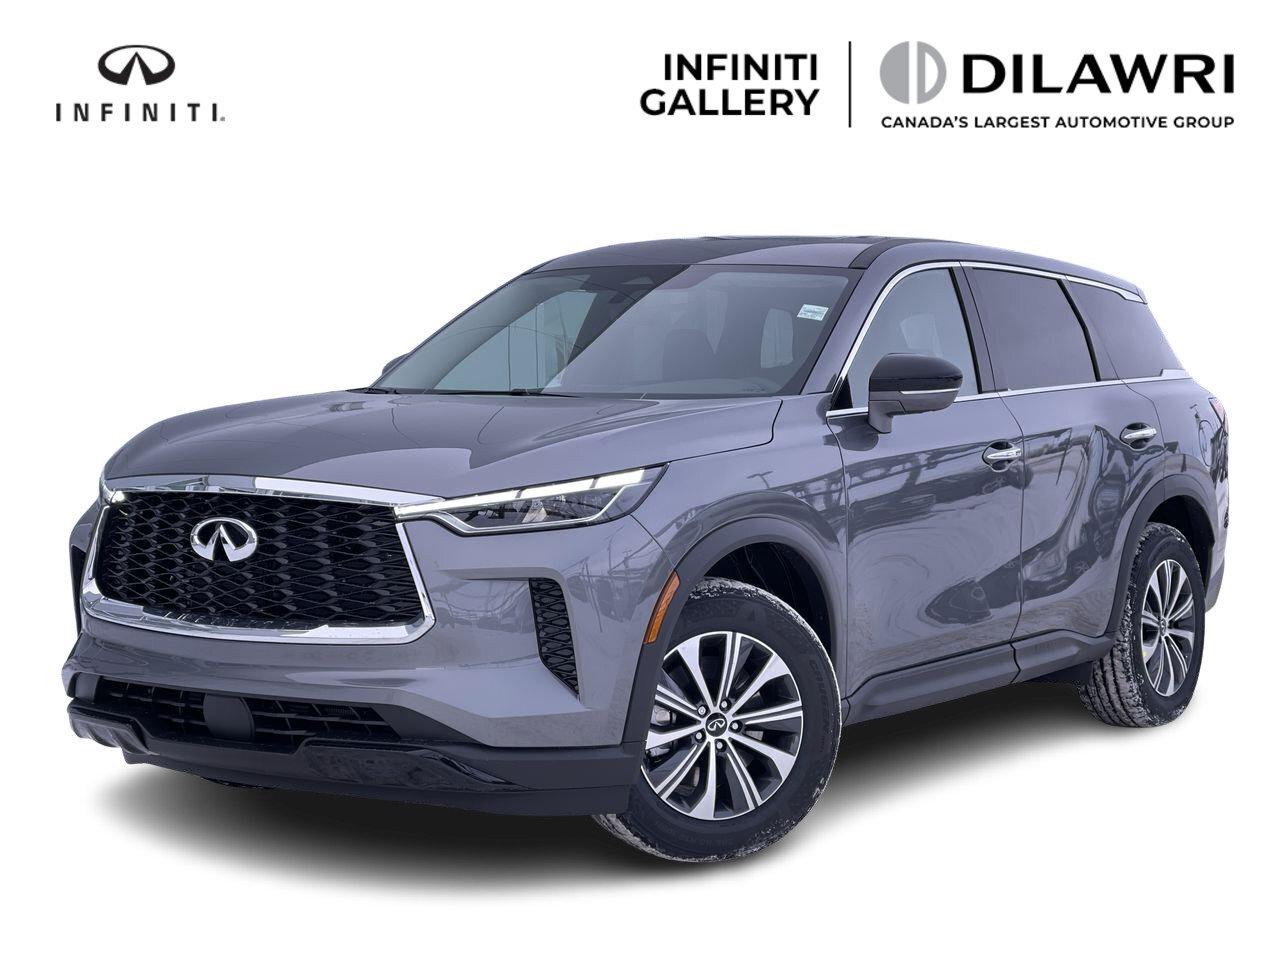 2023 Infiniti QX60 PURE Model Year Clearance - Save Thousands!